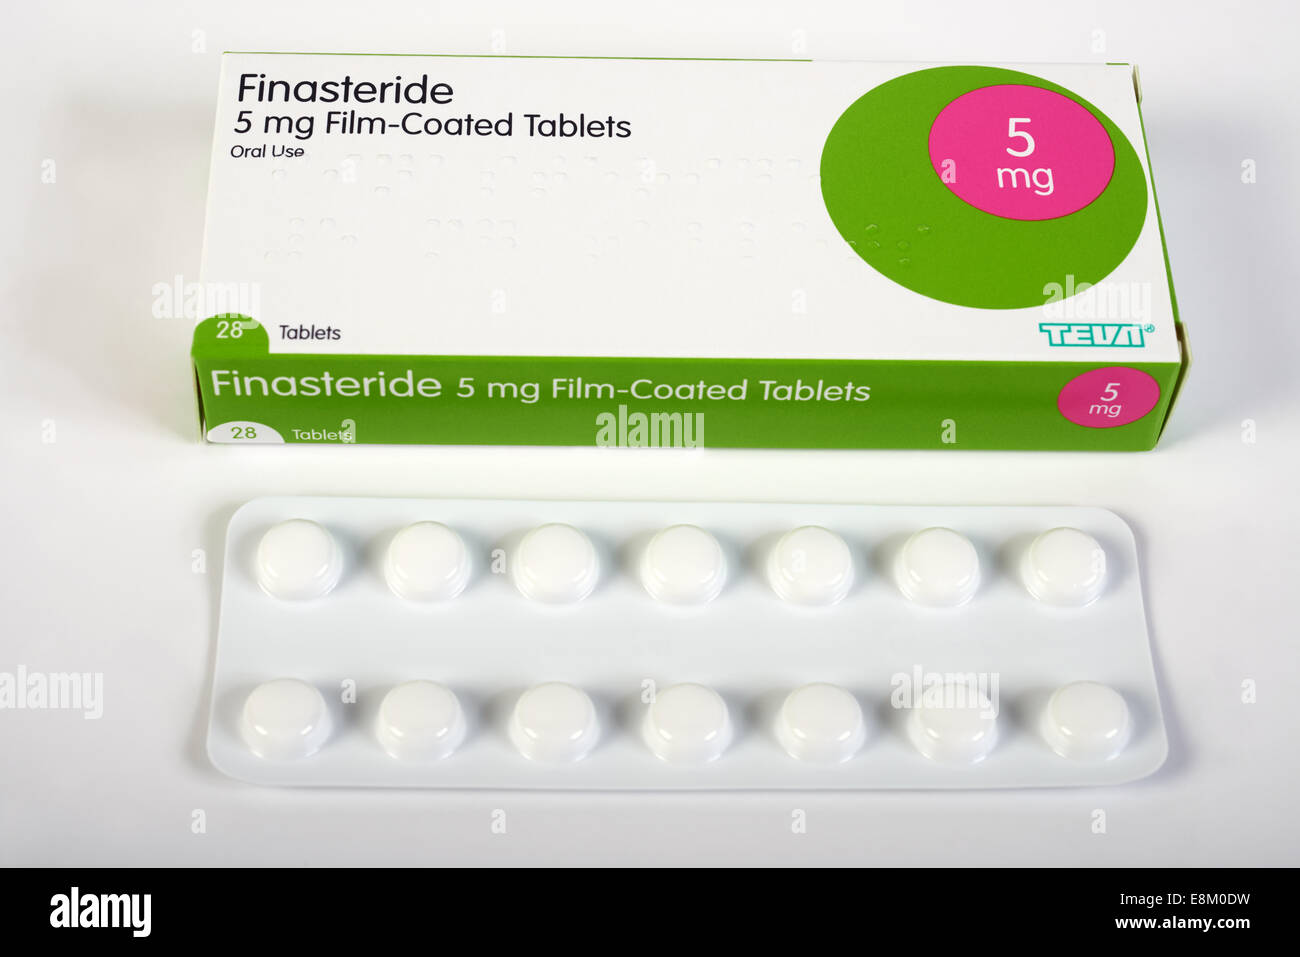 finasteride 5mg what is it used for